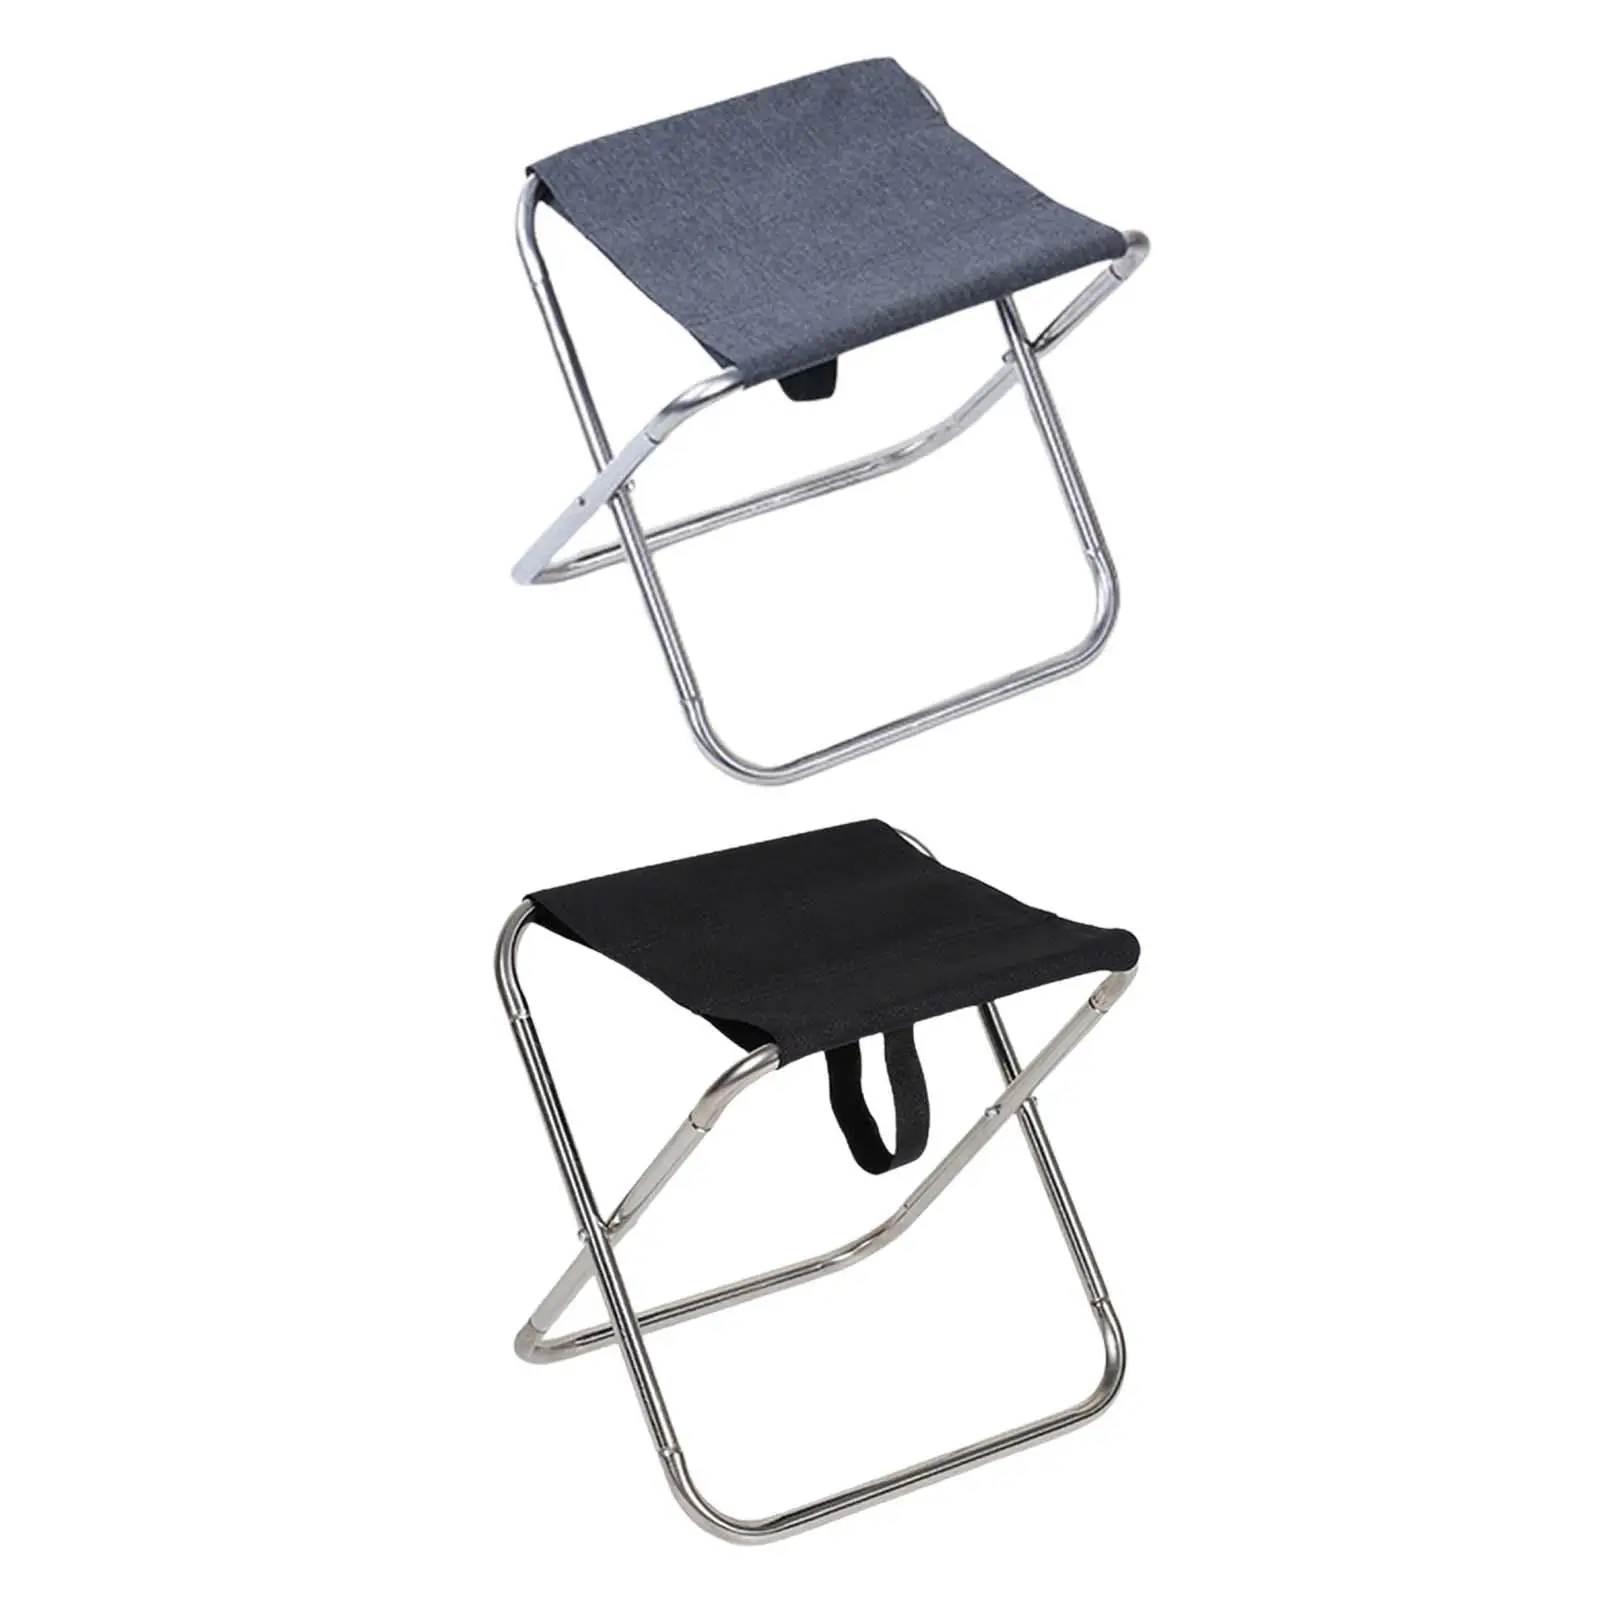 Folding Stool Camping Ultralight Reusable Easy to Carry Camp Stool Fishing Chair for Fishing Garden Backpacking Barbecue Picnic